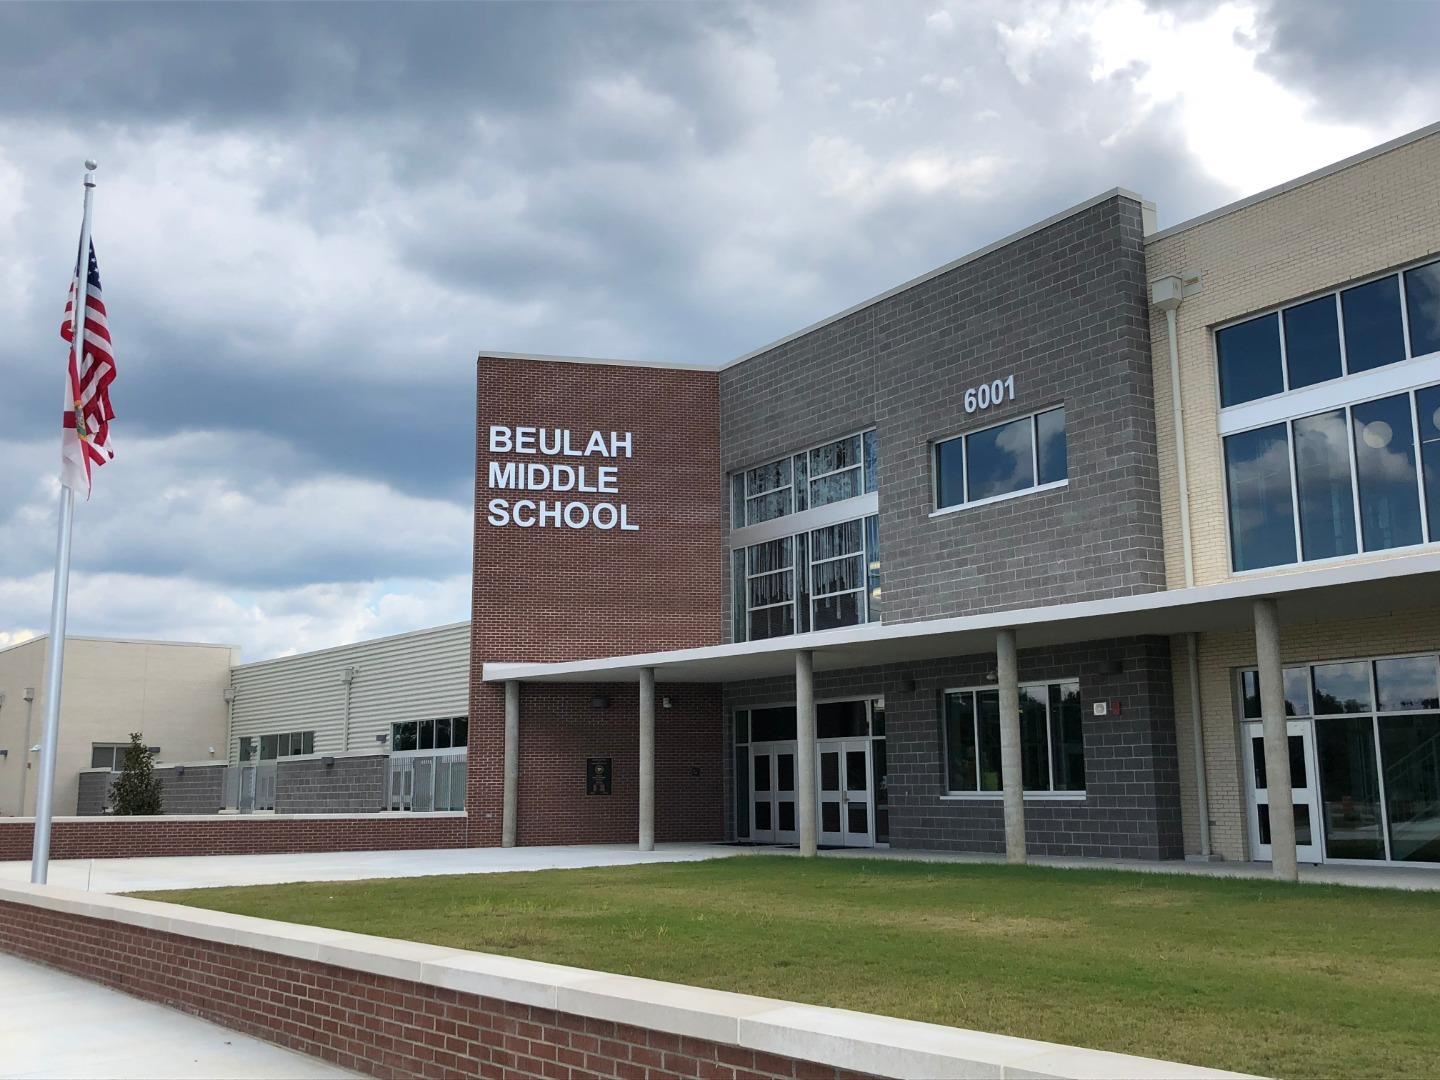 A photograph of the front of the new Beulah Middle School